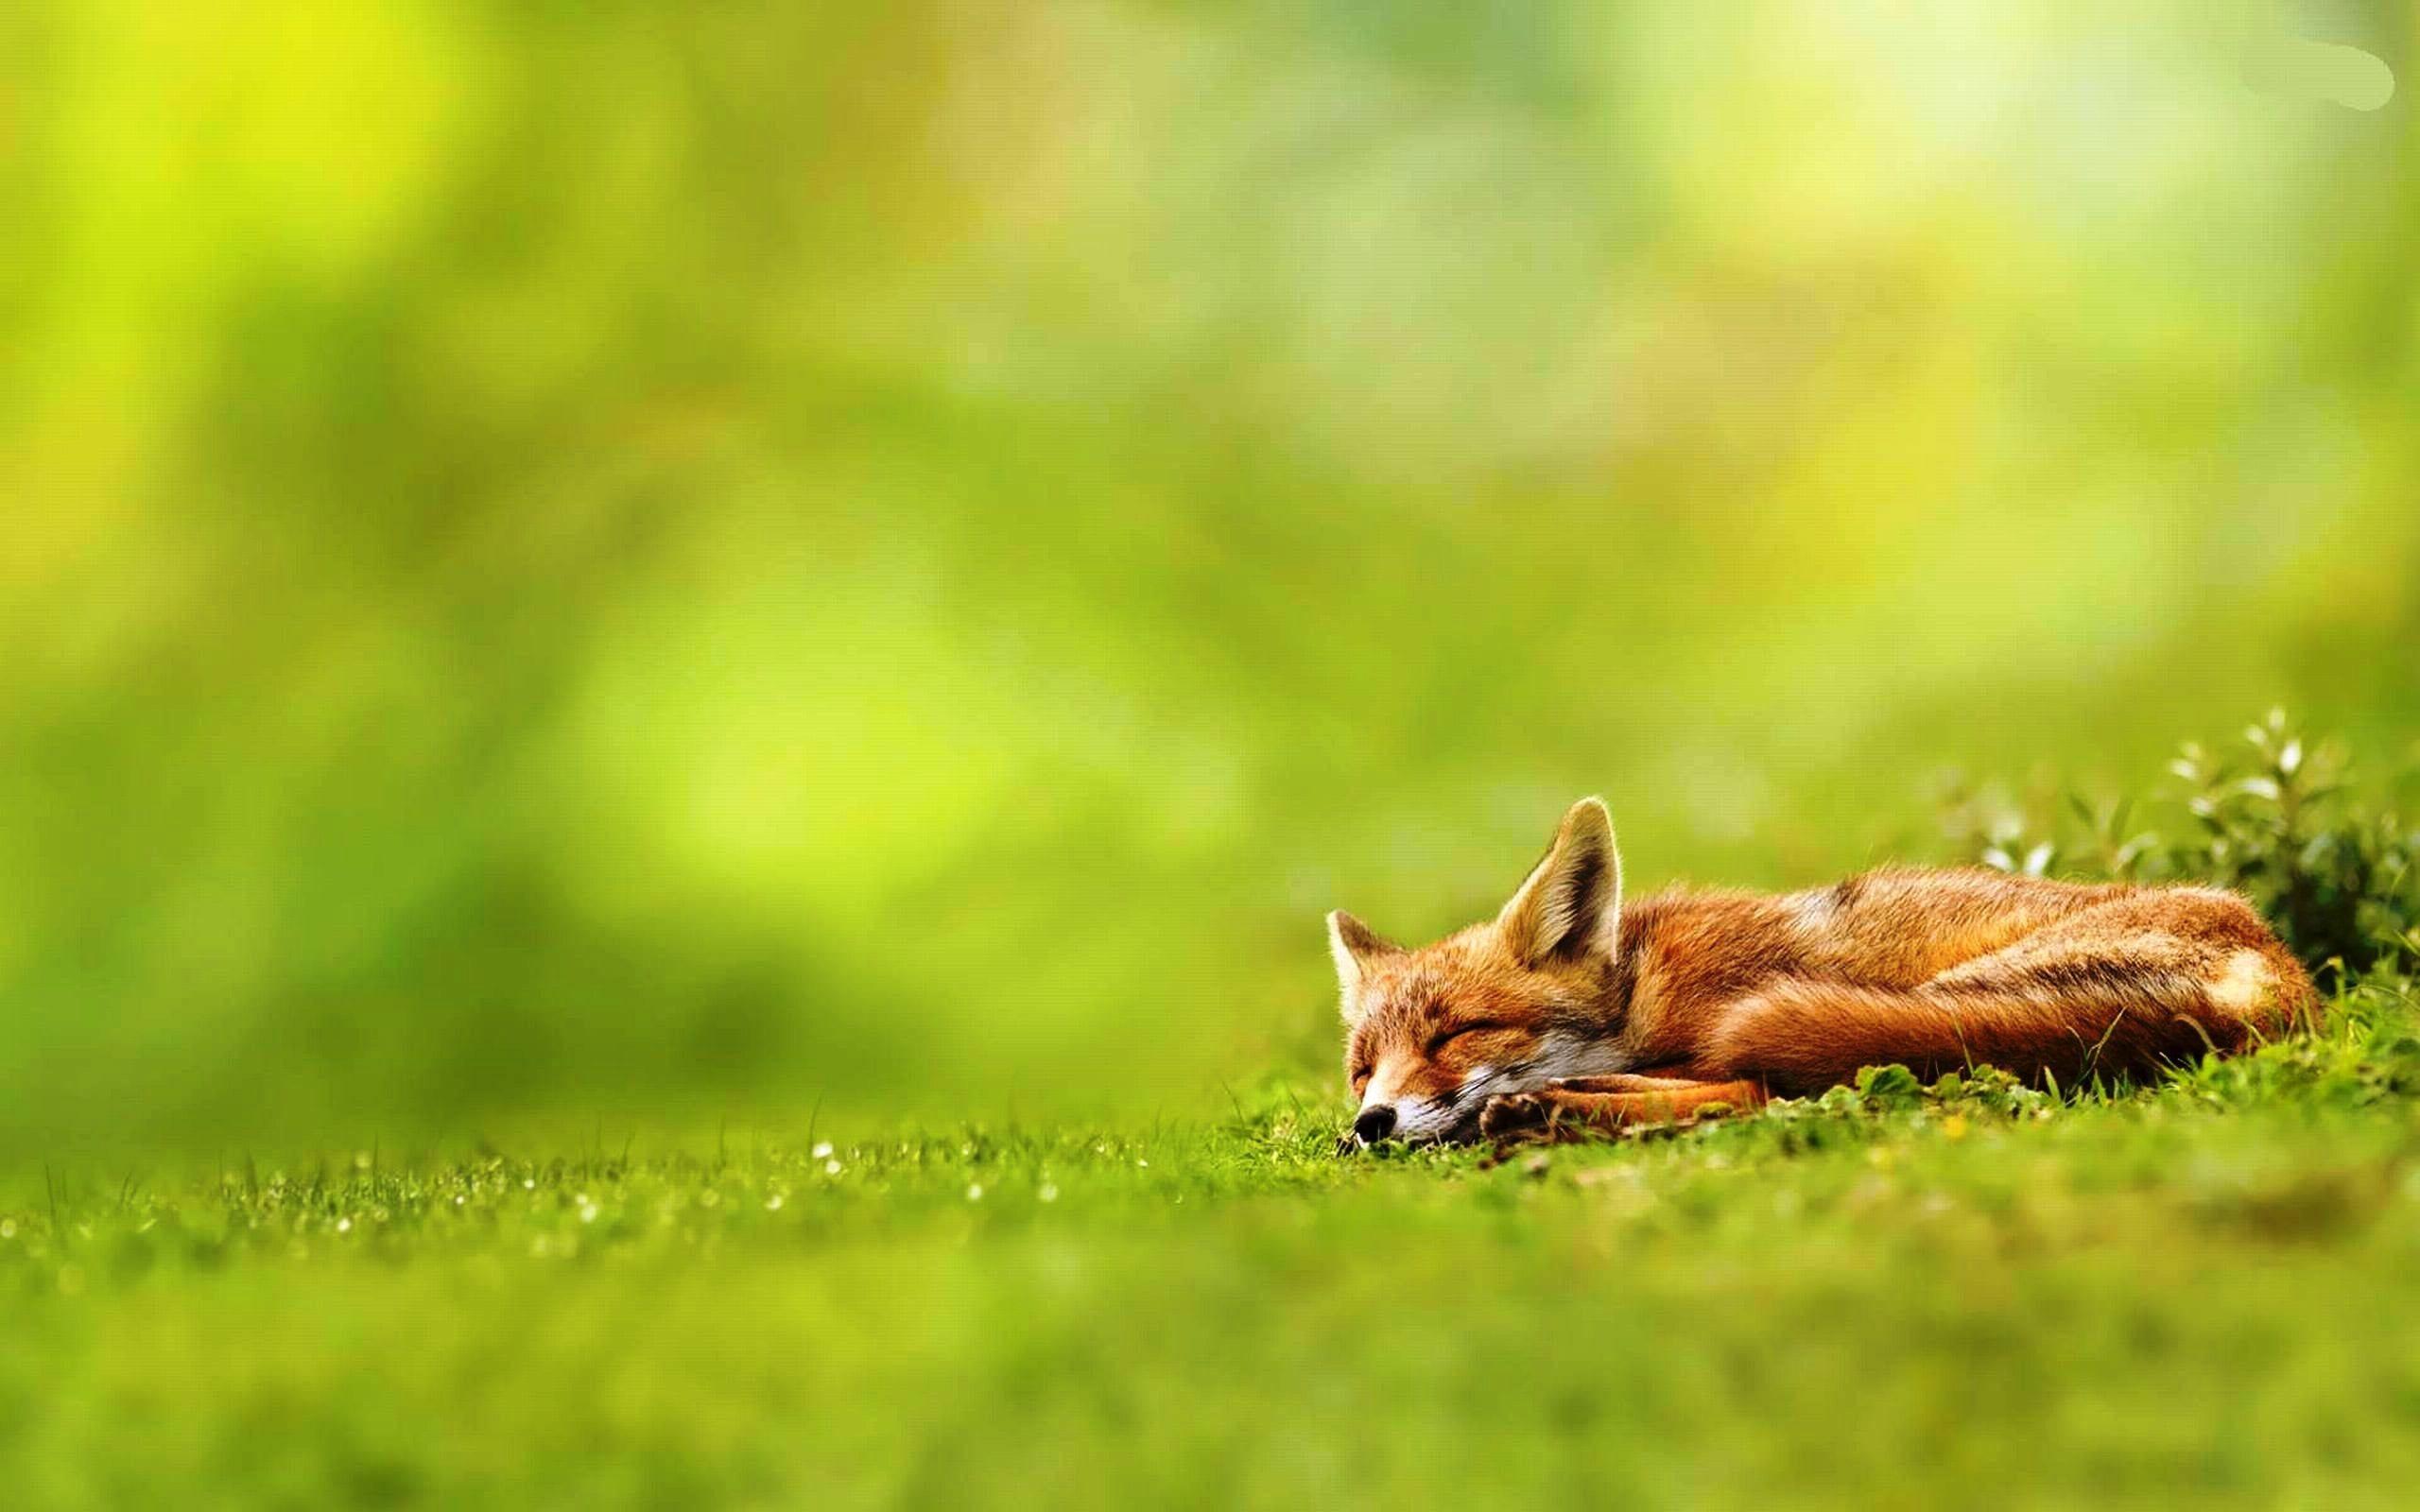 Red Fox Wallpaper background picture